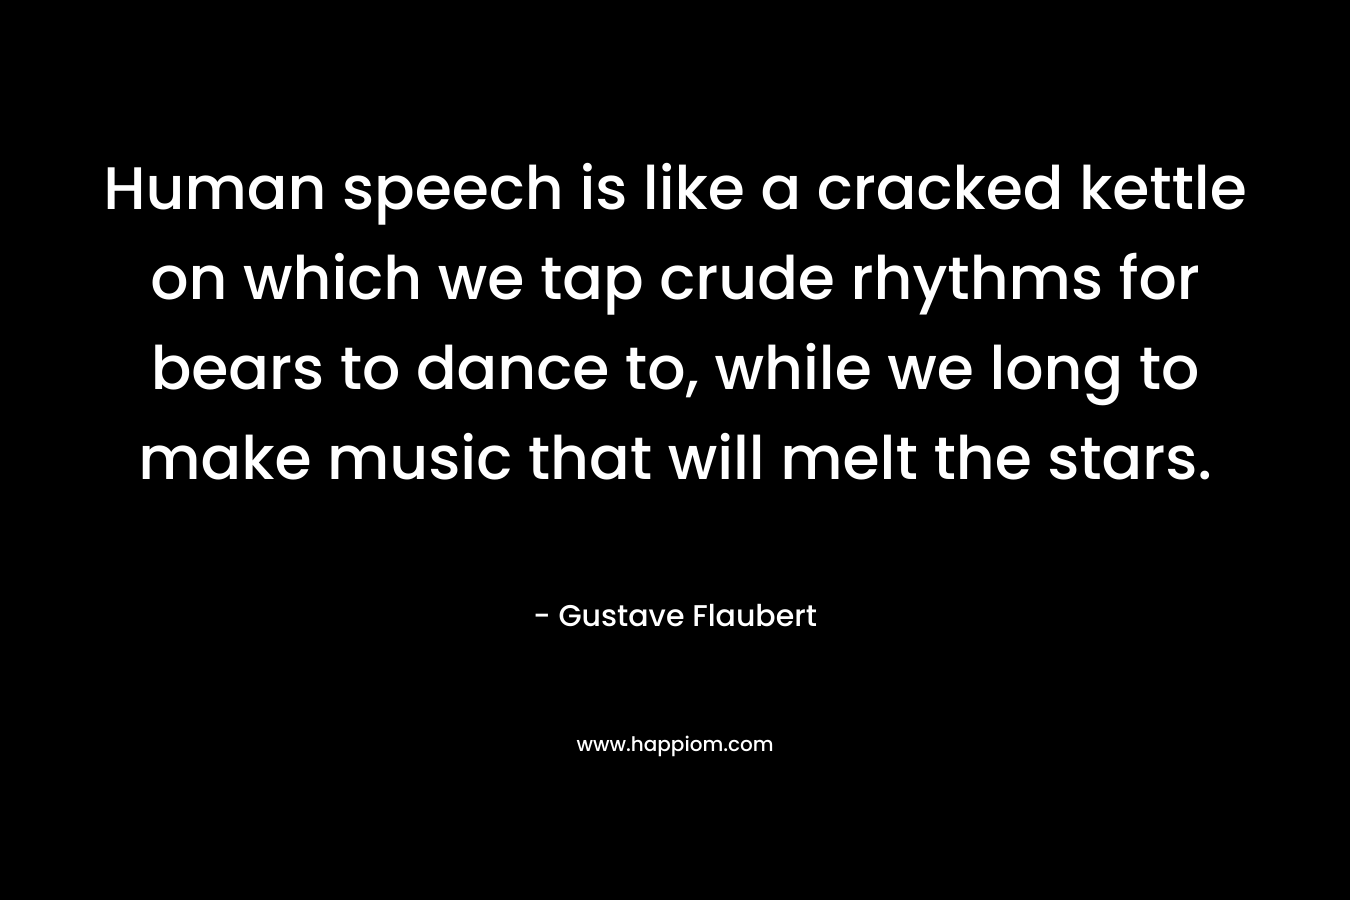 Human speech is like a cracked kettle on which we tap crude rhythms for bears to dance to, while we long to make music that will melt the stars. – Gustave Flaubert